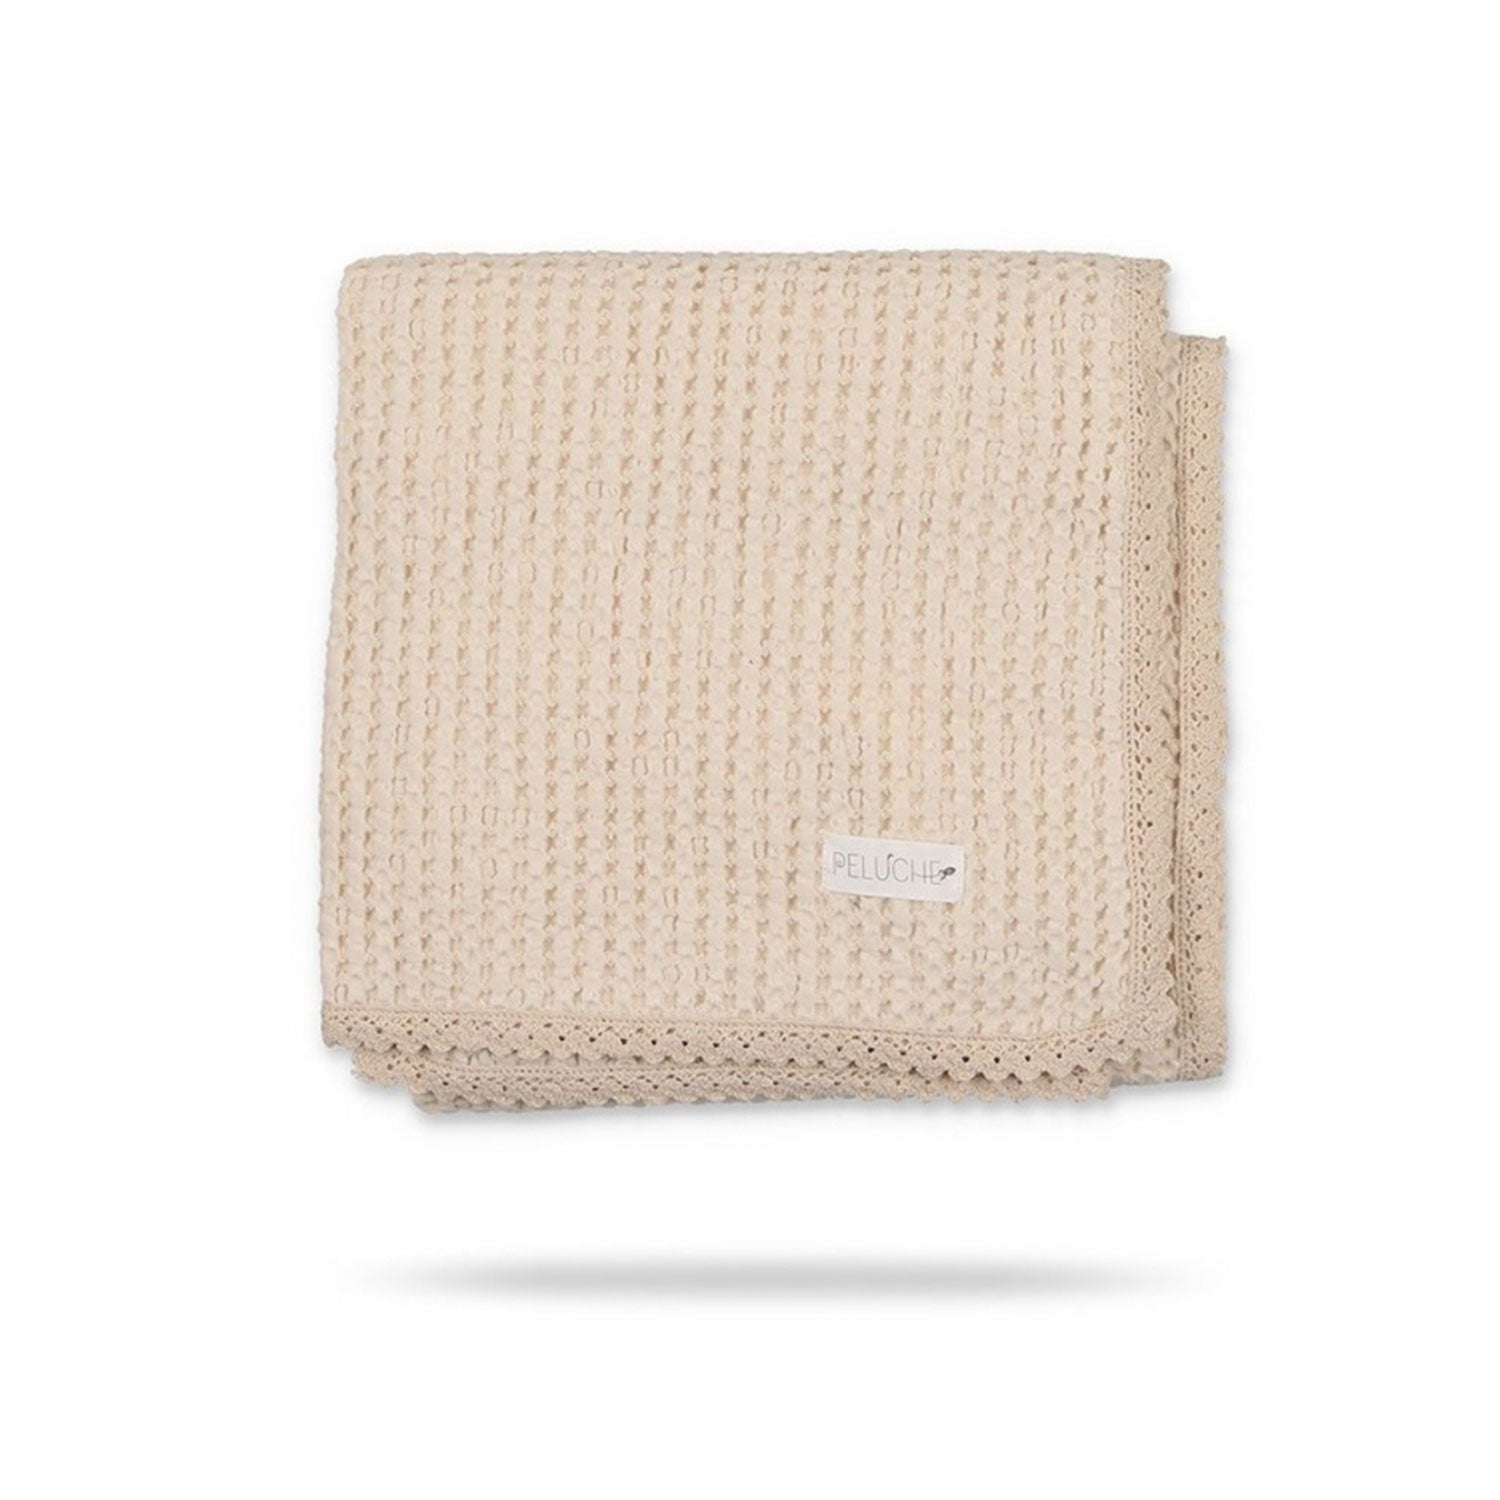 Peluche Natural Waffle Blanket with Lace Trim | Buttons Bebe